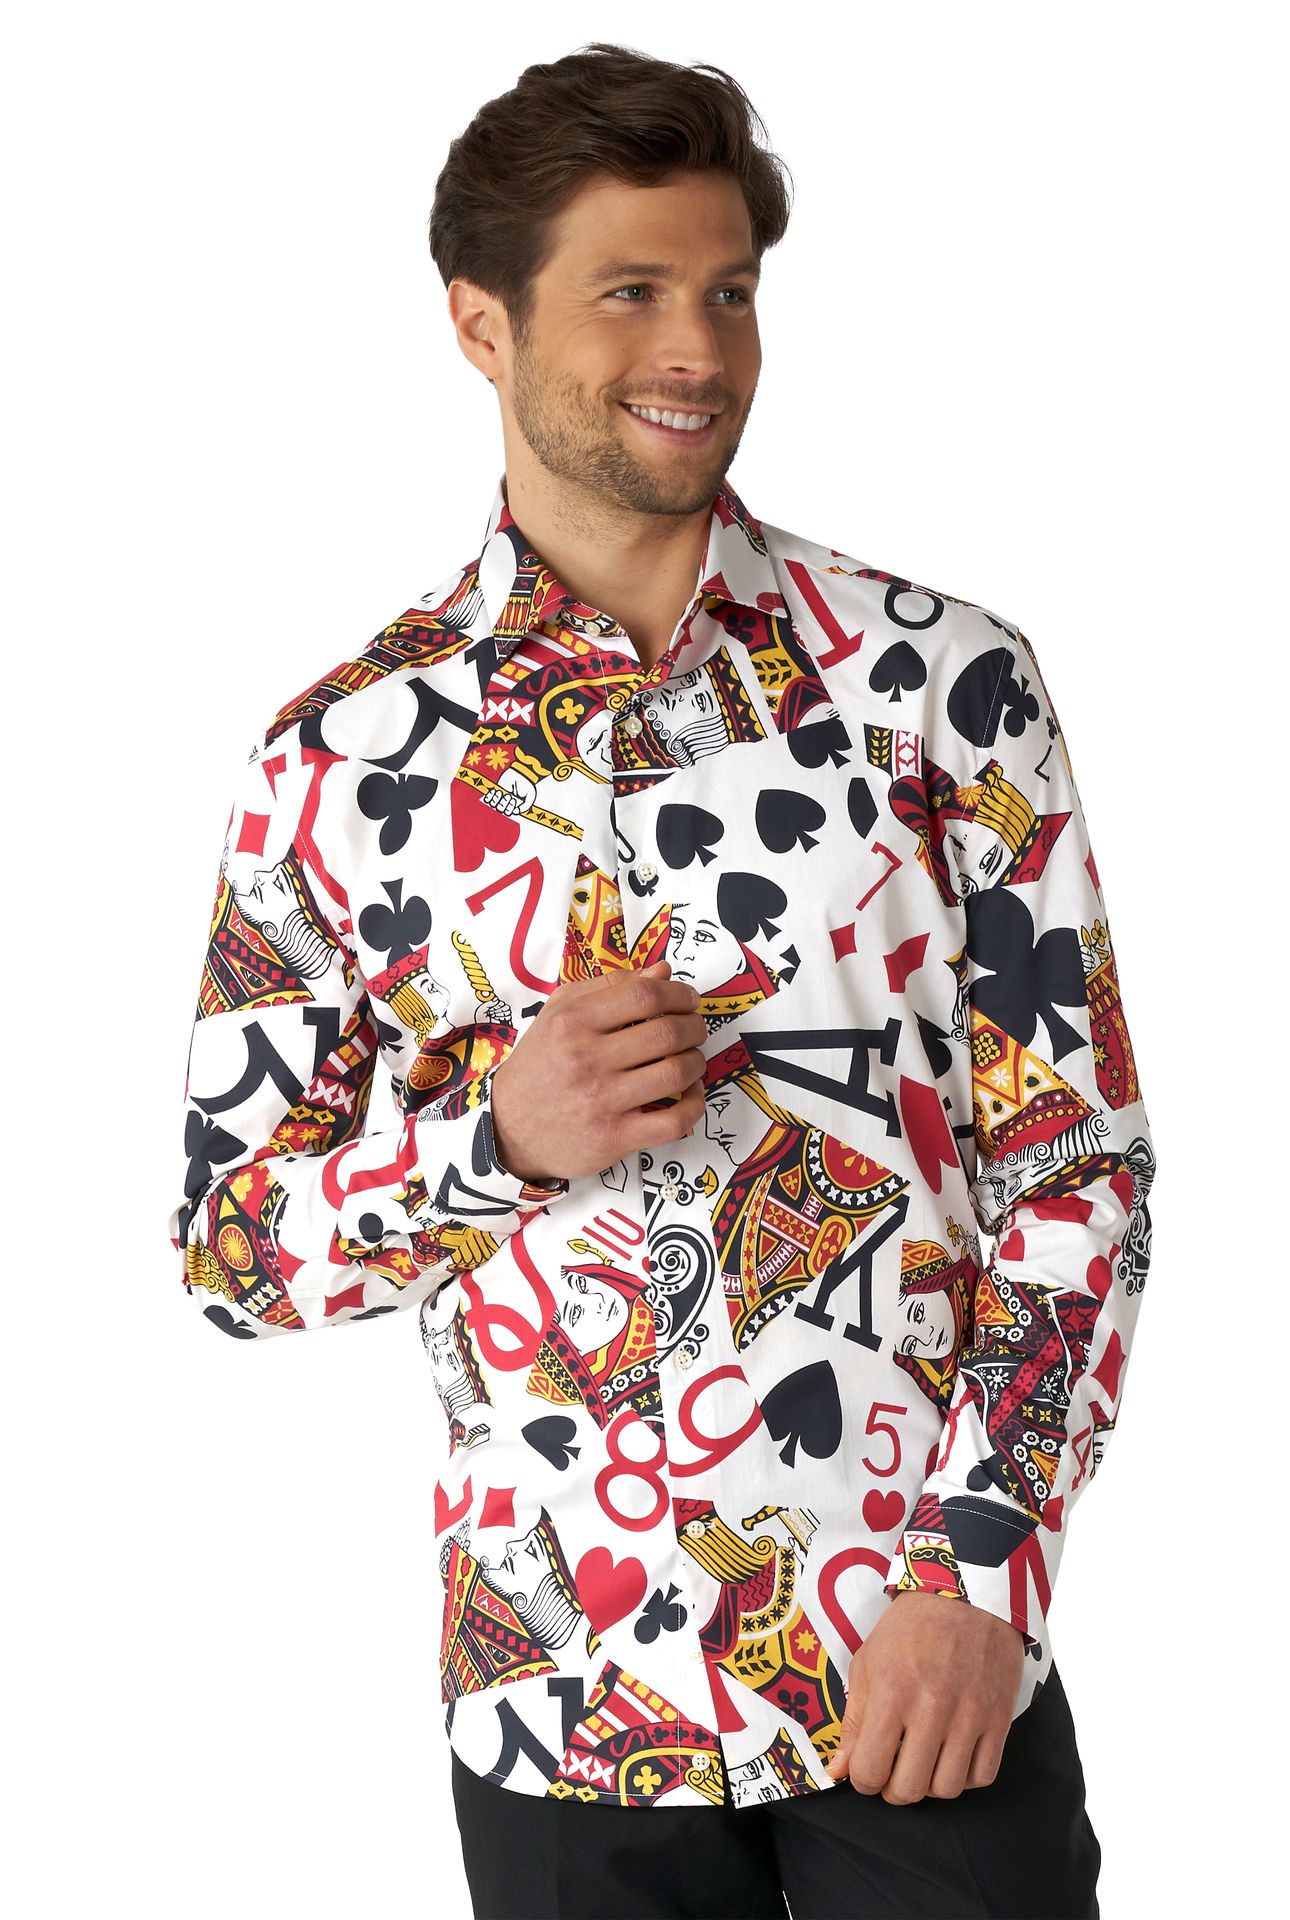 Opposuits King of Clubs blouse